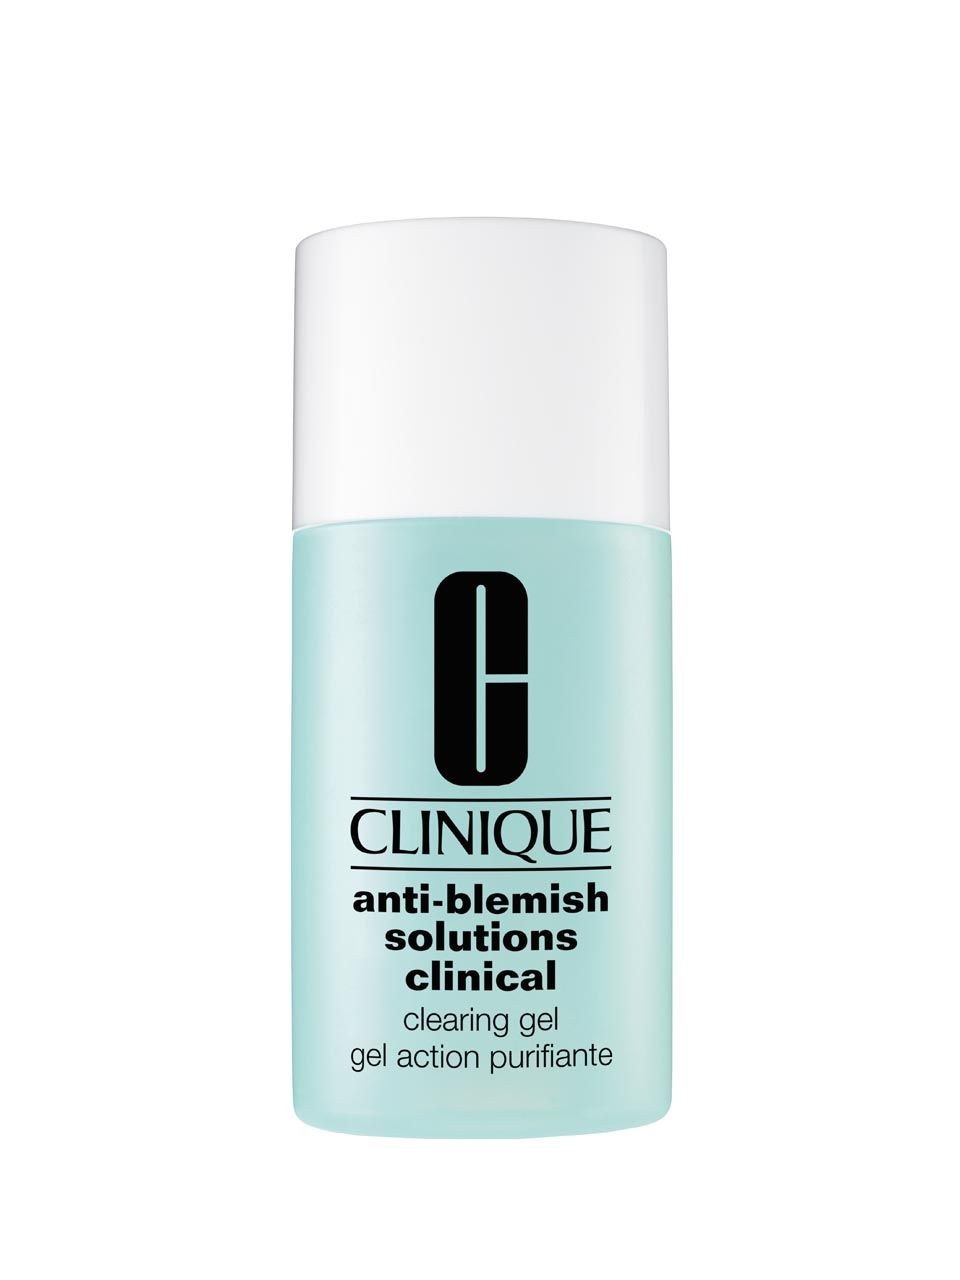 Clinique-anti-blemish-solutions-clearing-gel.jpg